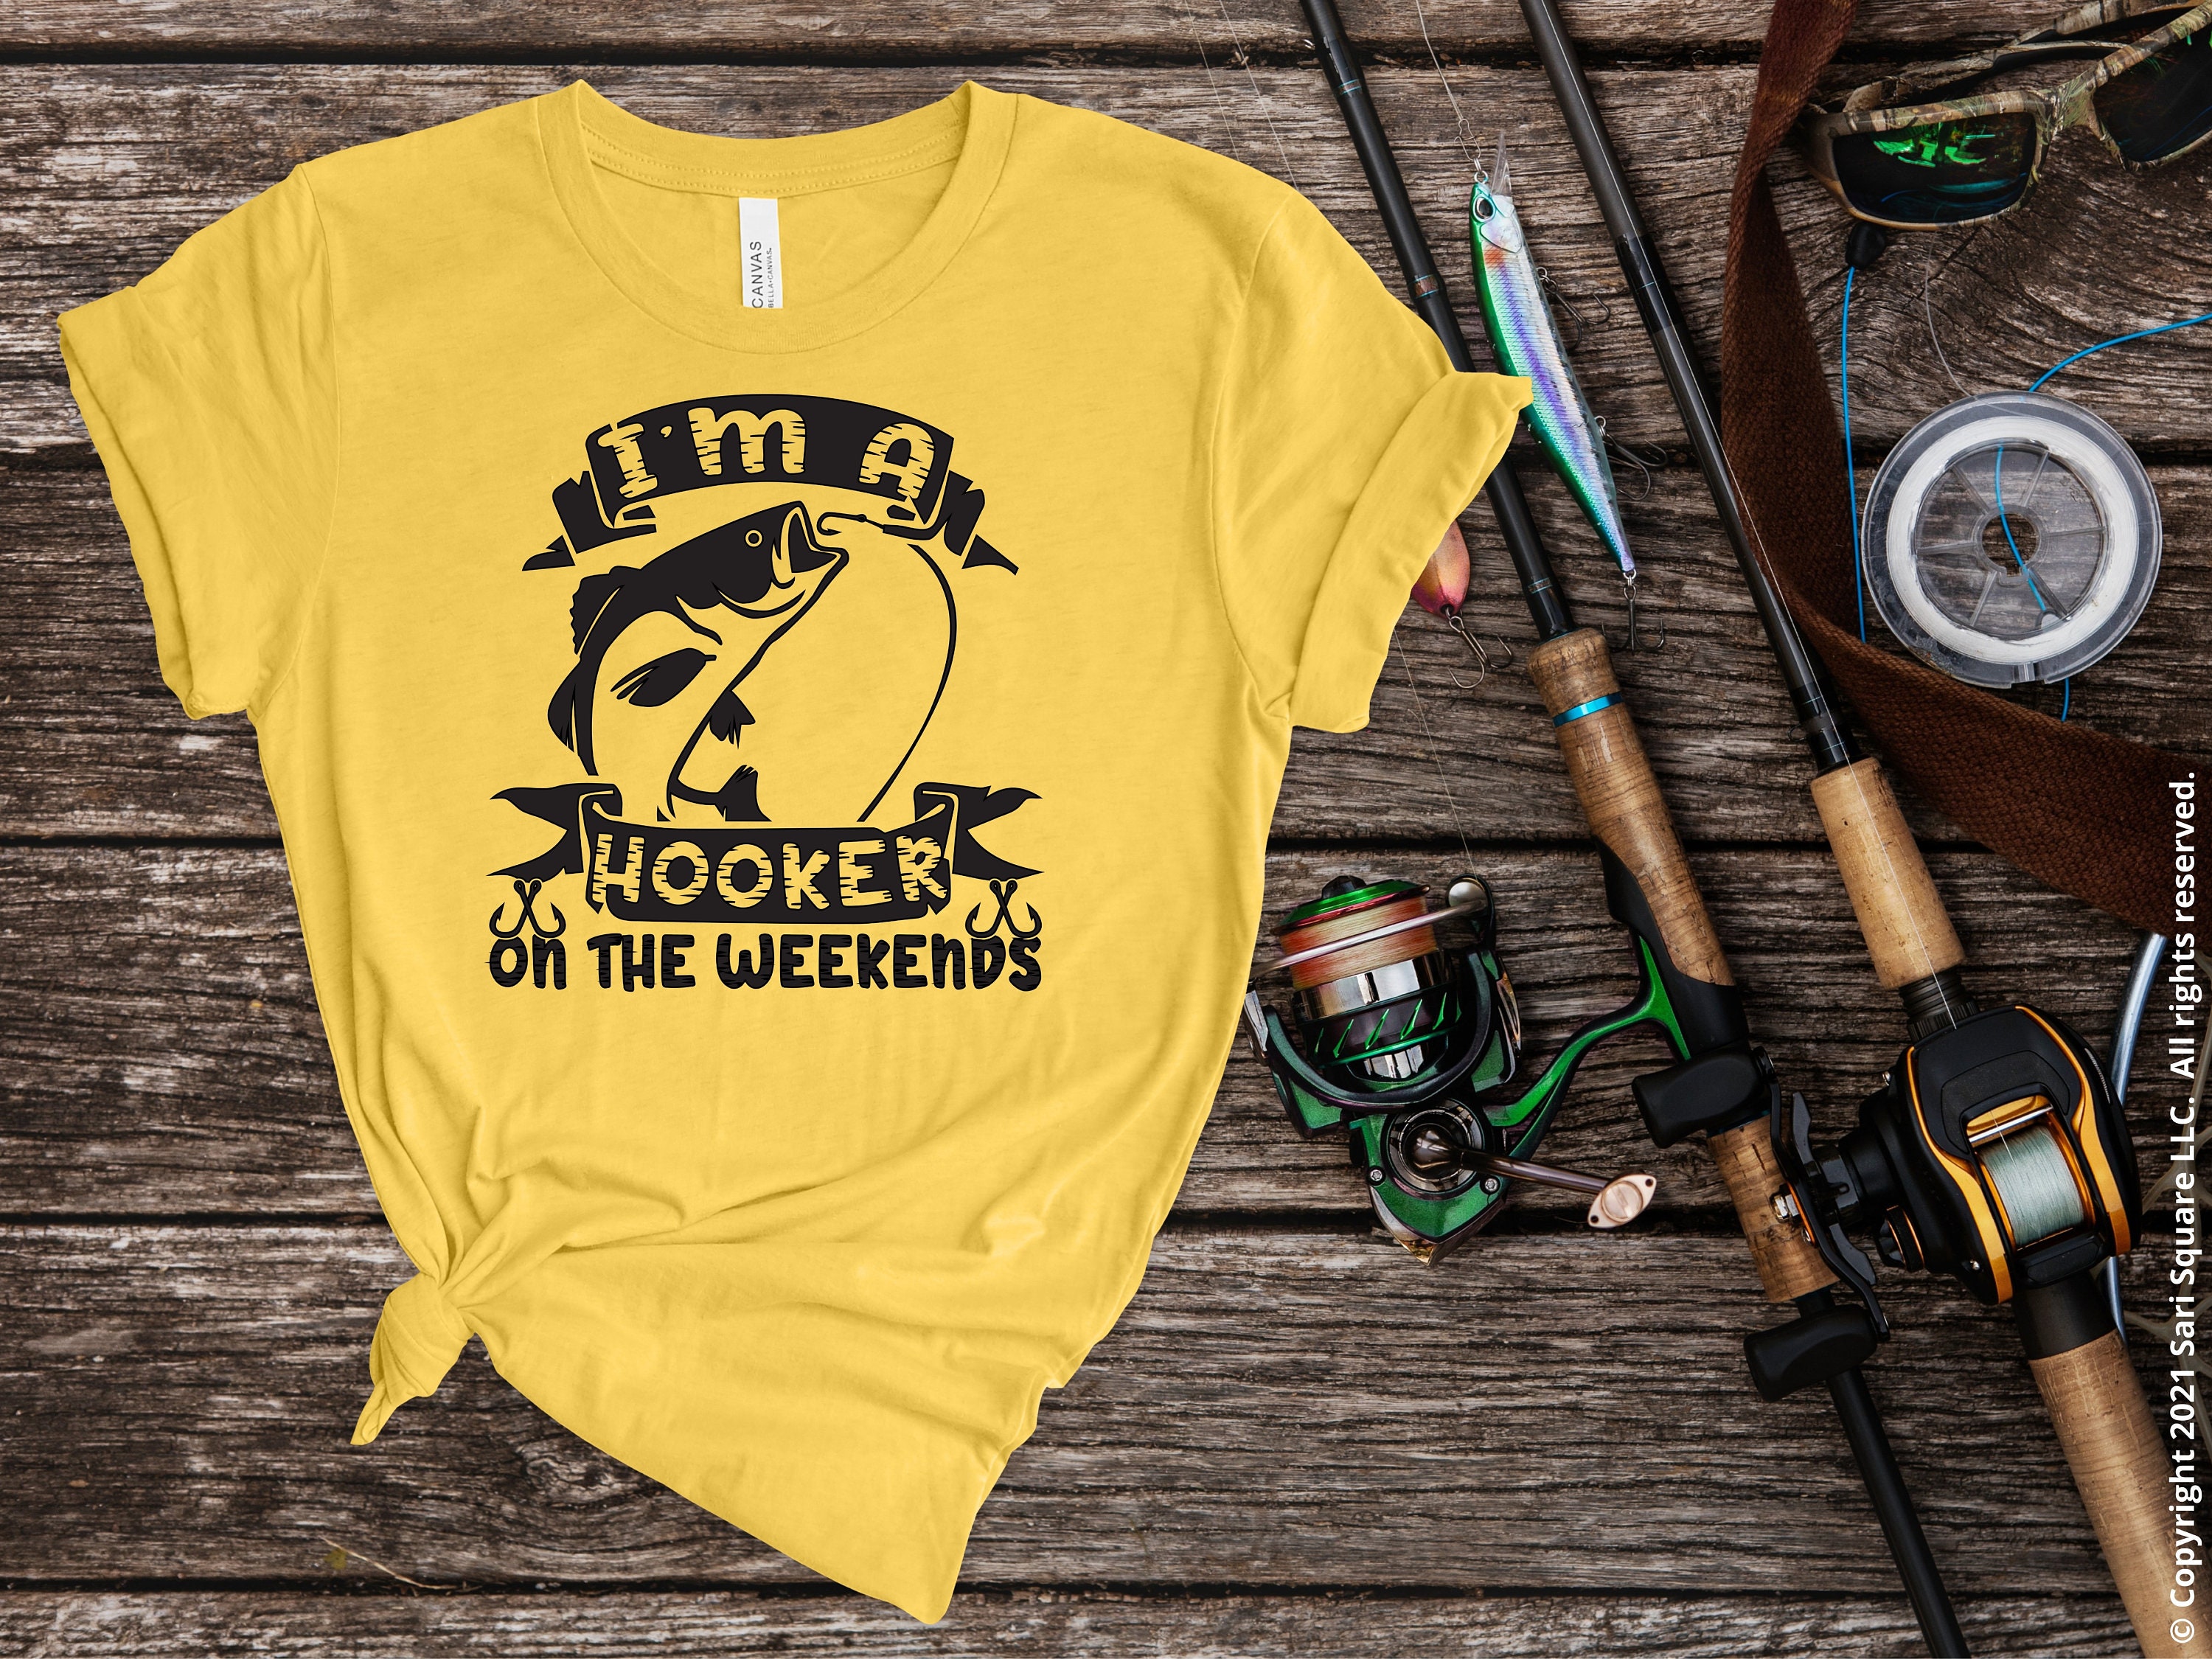 Buy I'm a Hooker on the Weekends Shirt, Fly Fishing Shirt, Steelhead  Fishing Shirt, Fishing Life Shirt, Fishing Shirt USA, Gift for Dad Online  in India 